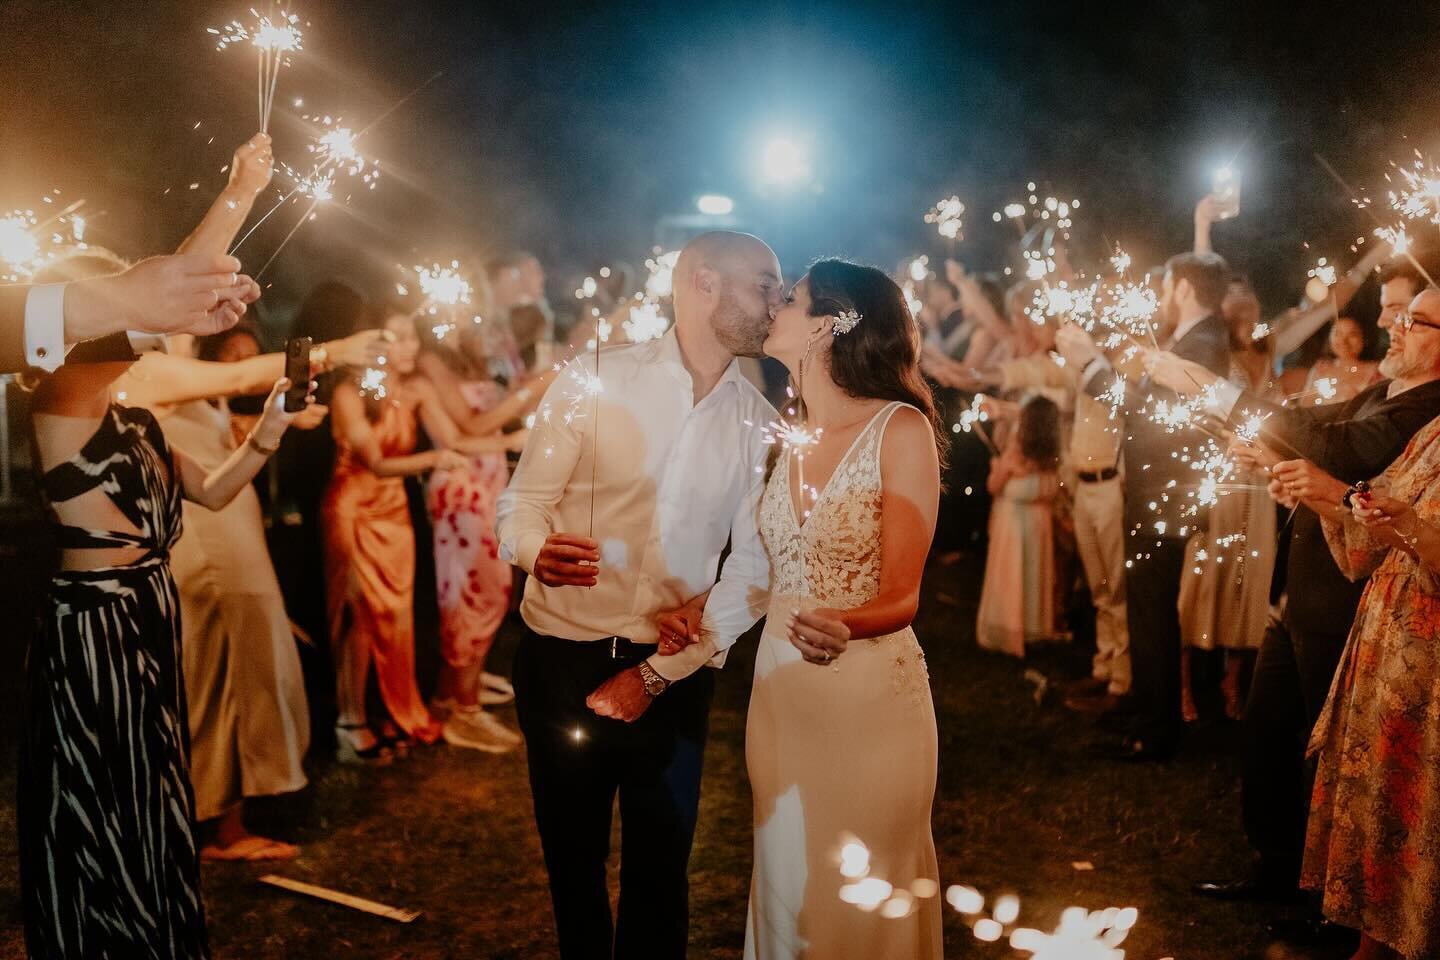 A beautiful send off at the end of a wonderful evening of celebrating for the loveliest couple T&amp;M,  who had their weddings at this fabulous Manor in the English countryside. We had so much fun personally handing out the sparklers to all the gues